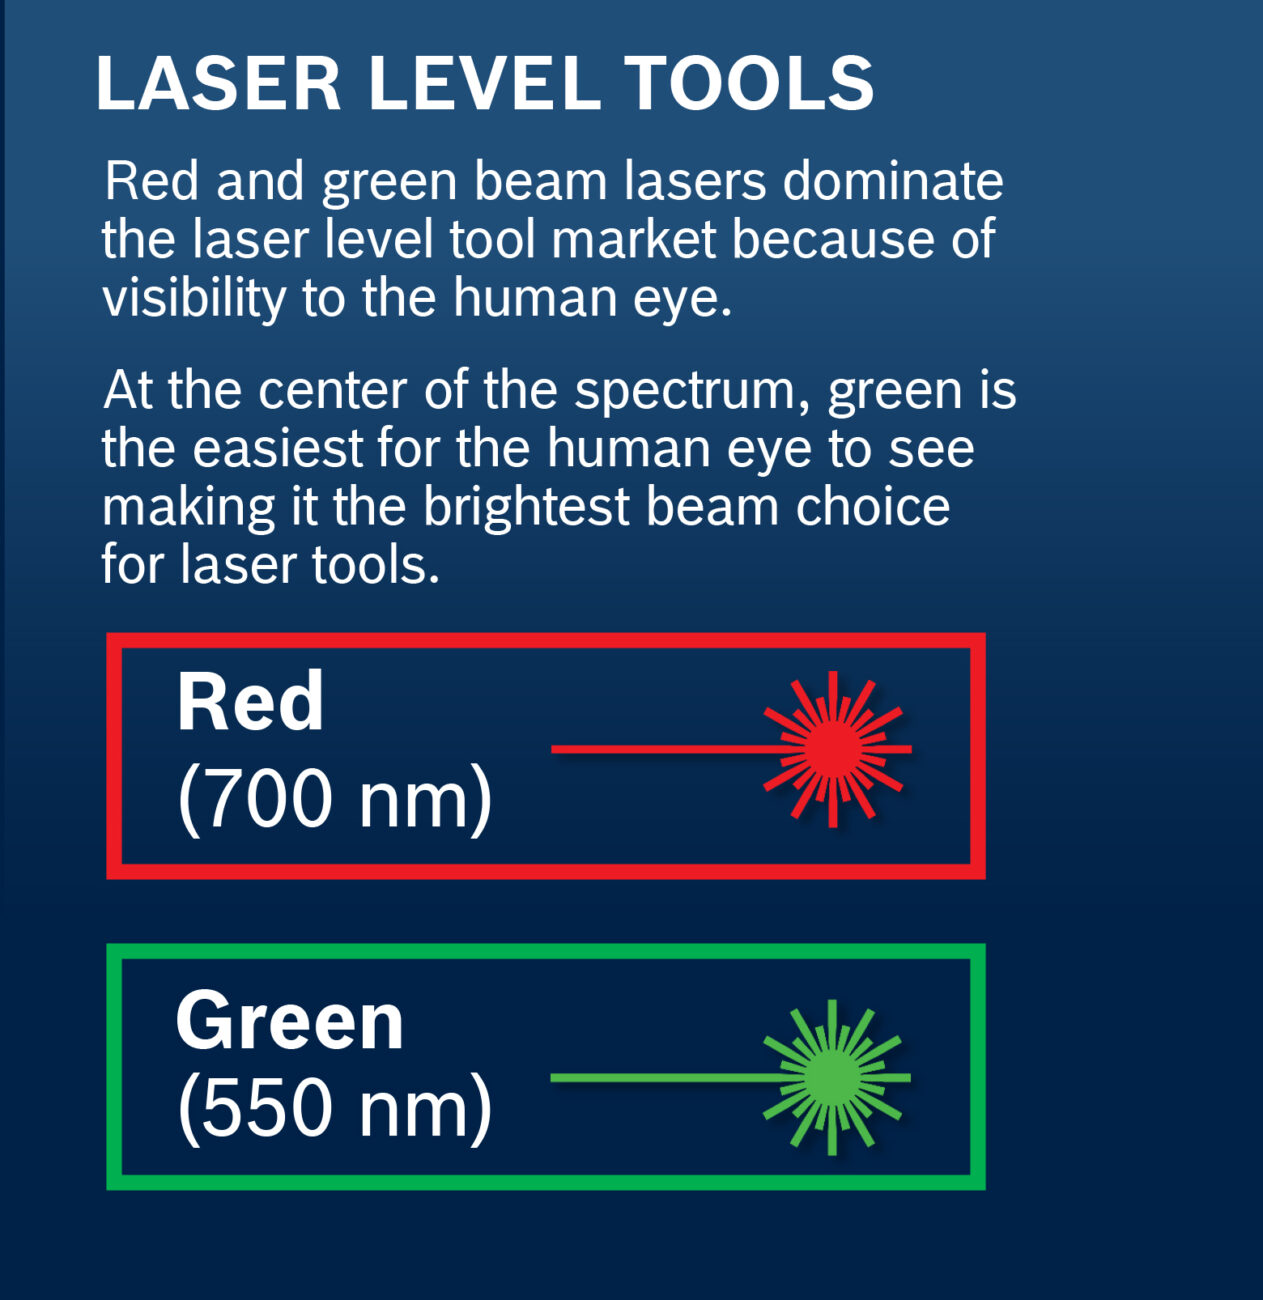 Red and green beam lasers dominate the laser level tool market because of visibility to the human eye. At the center of the spectrum, green is the easiest for the human eye to see, making it the brightest beam choice for laser tools.